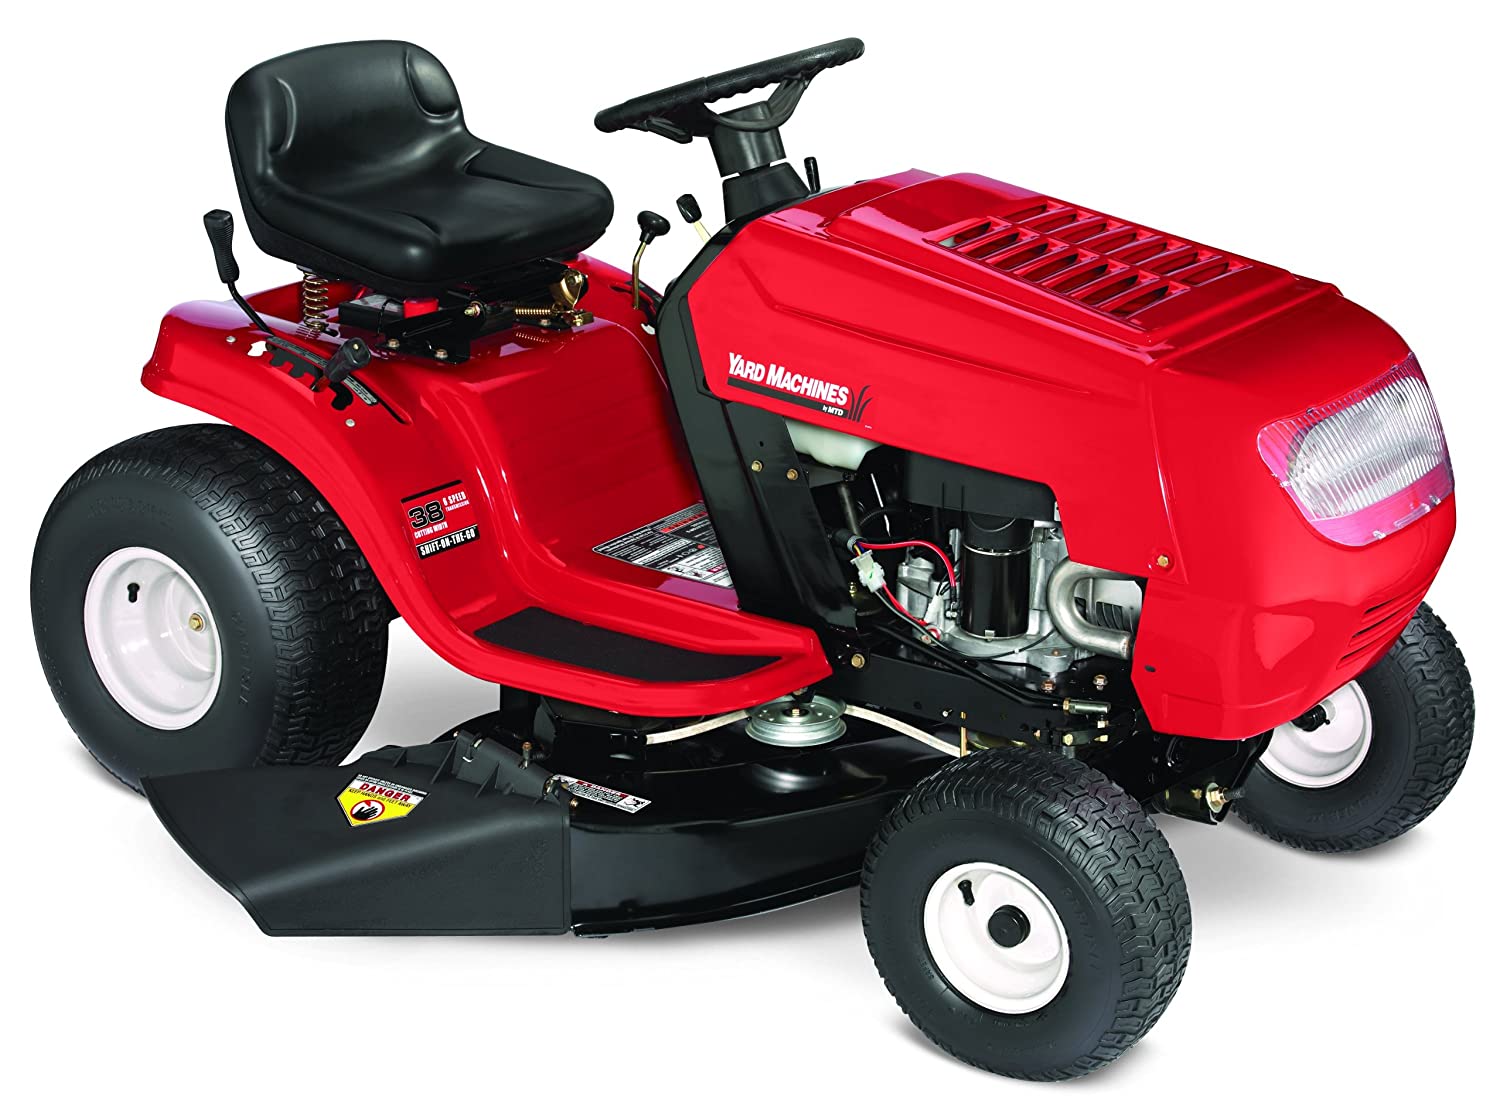 Top 5 Best Riding Lawn Mower For The Money Reviews 2017 ...